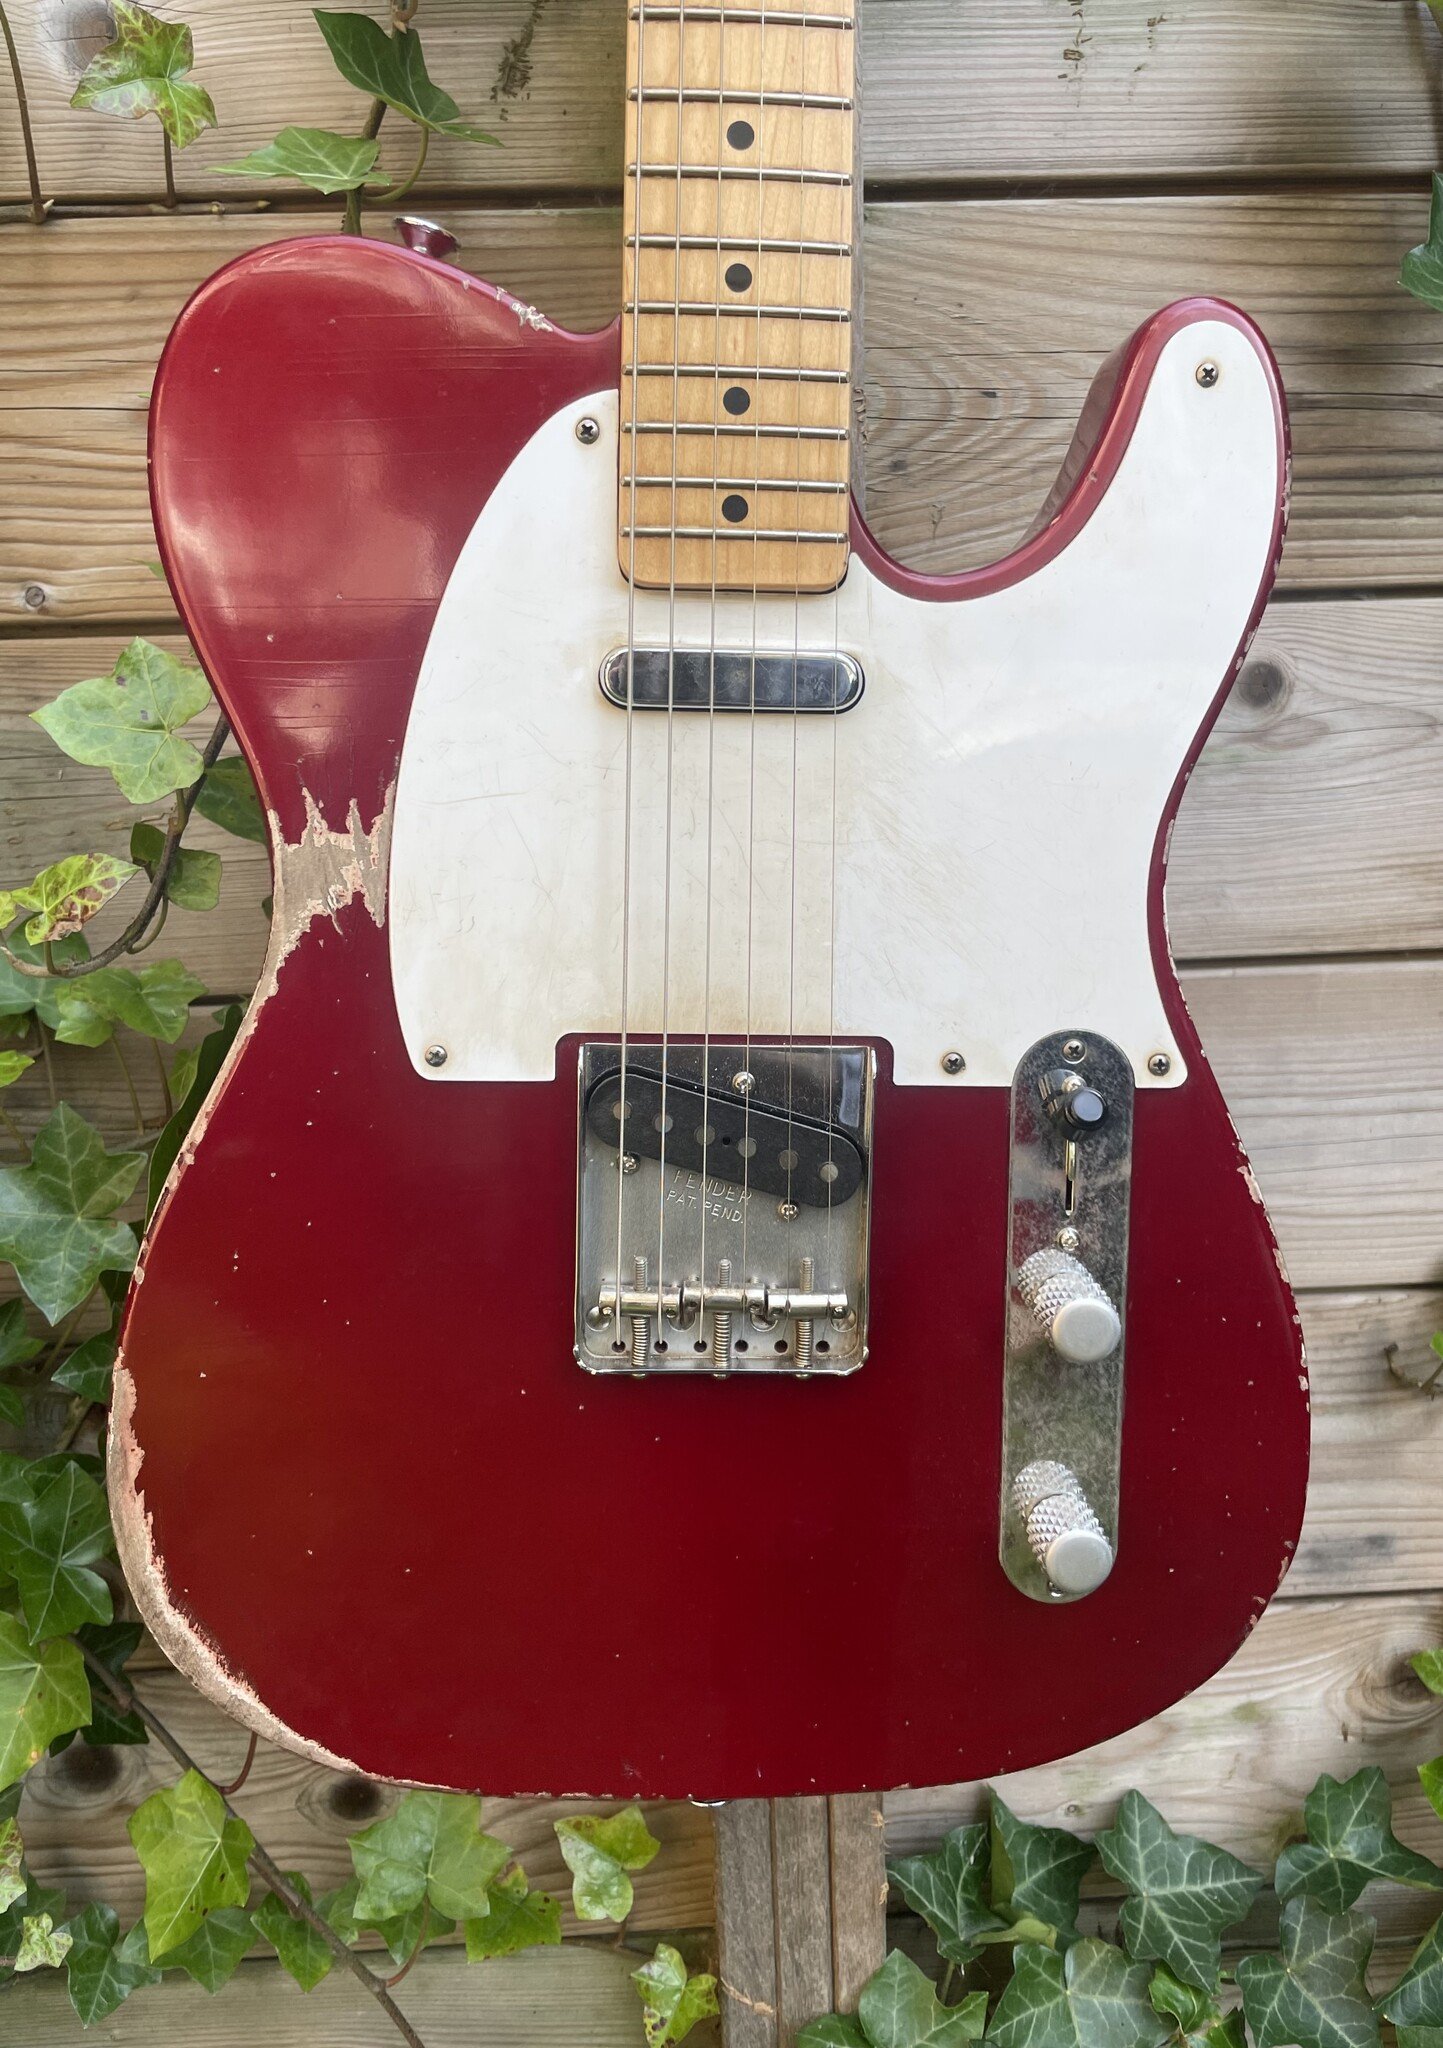 Hayride Hayride Telecaster Candy Apple Red